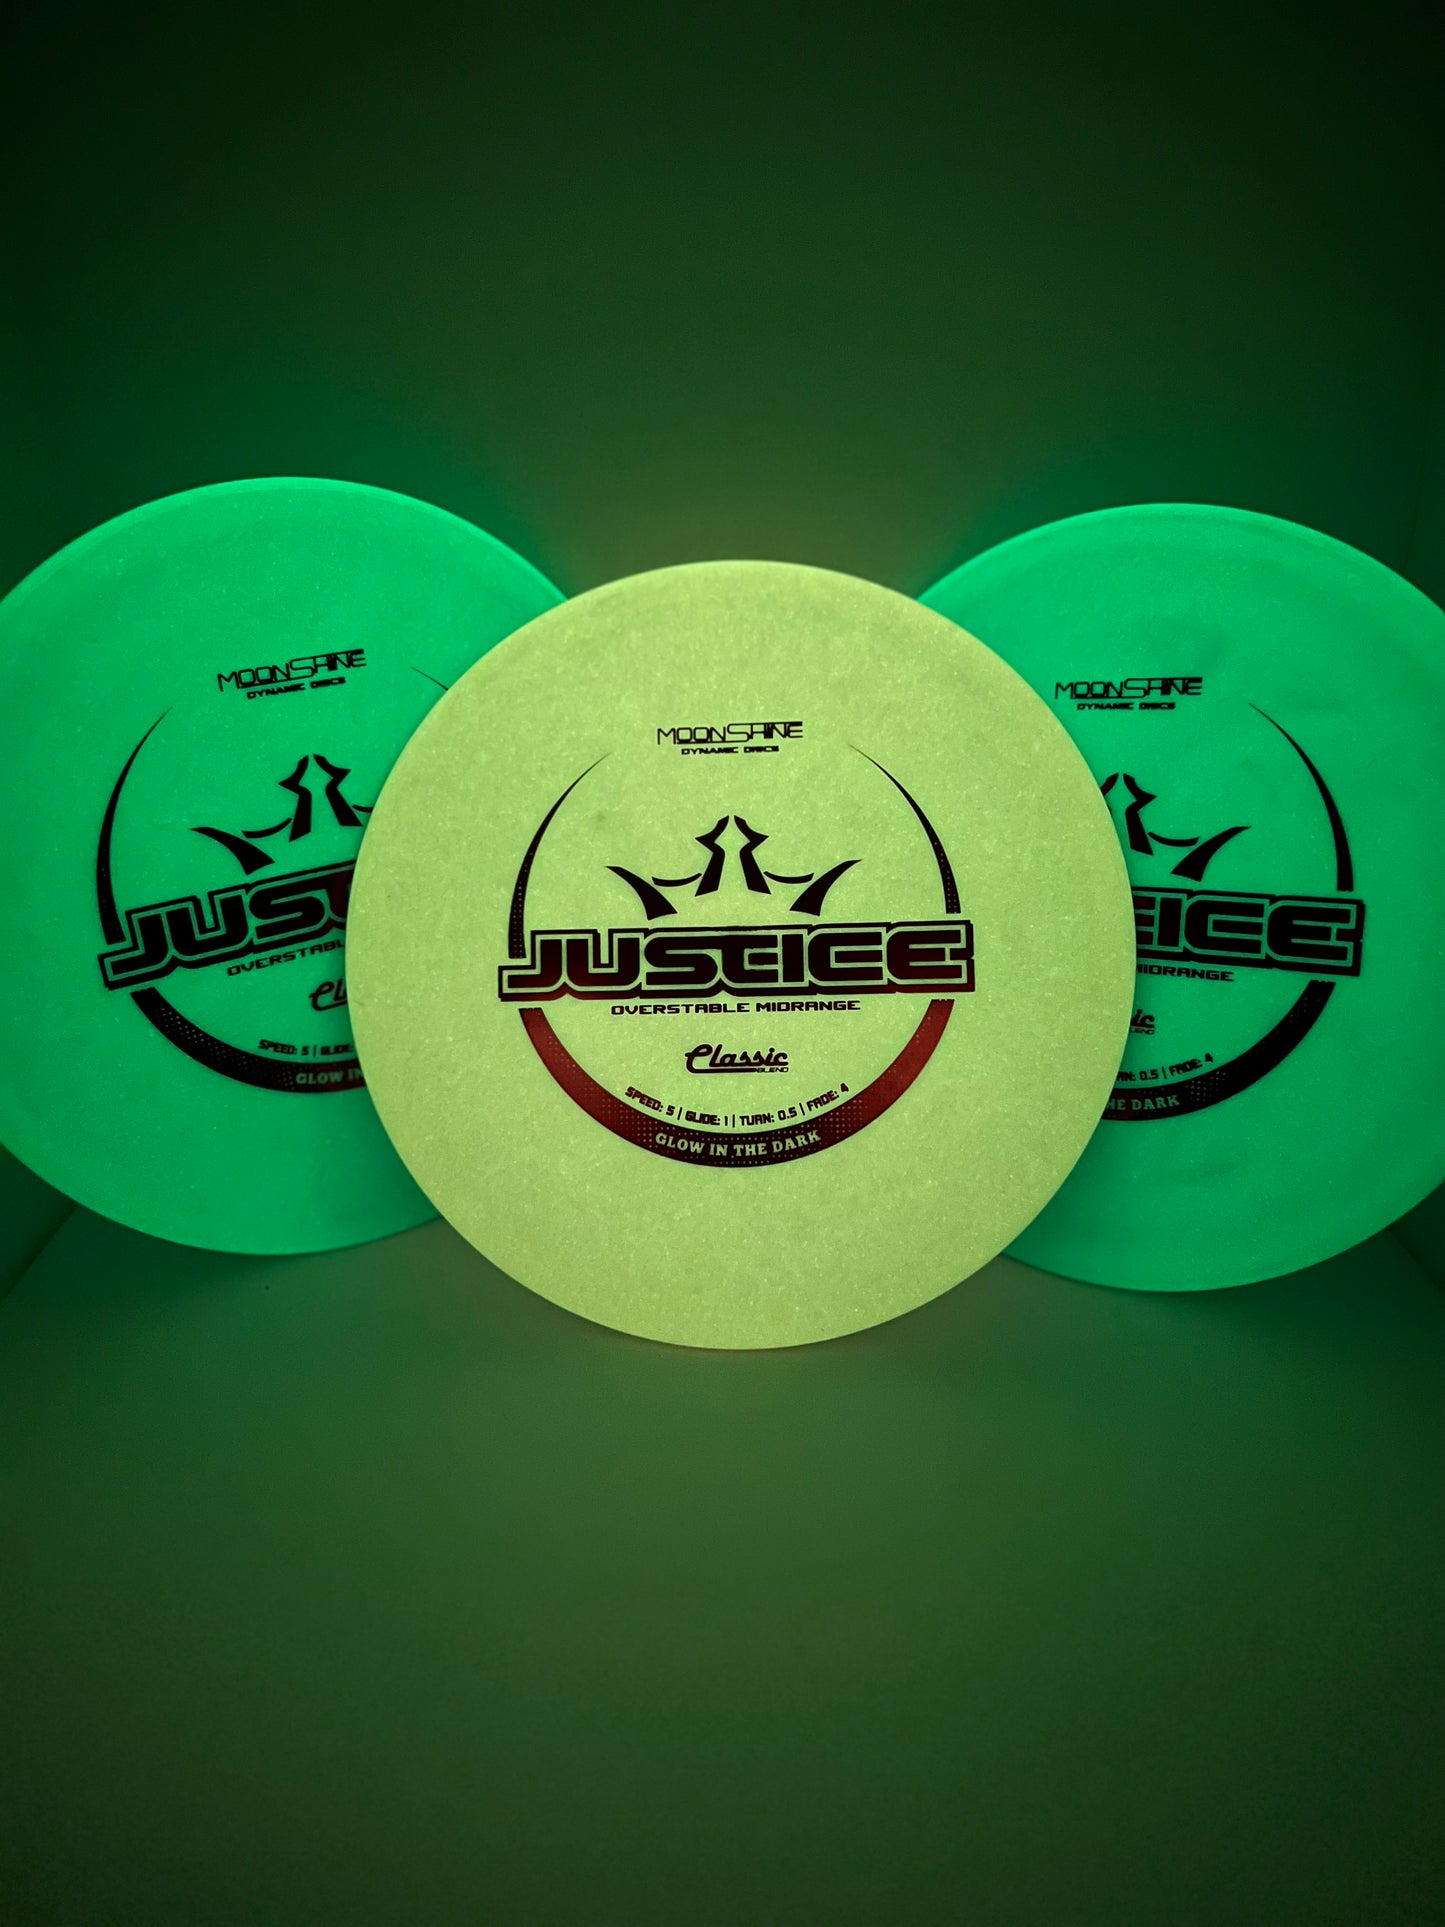 Dynamic Discs Justice